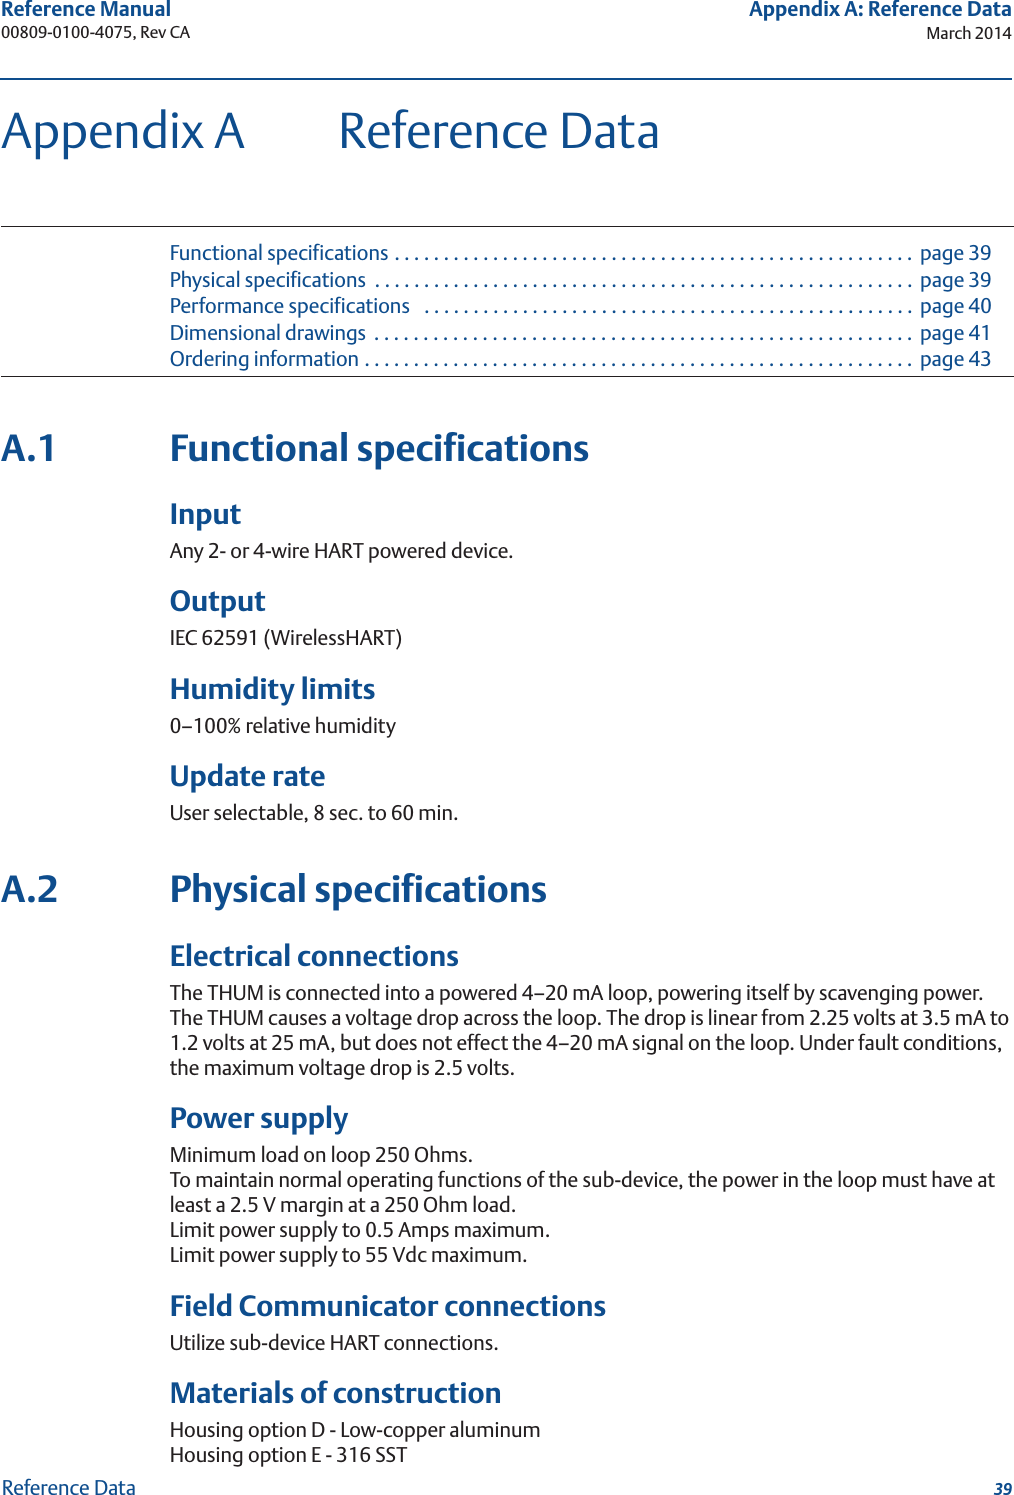 39Reference Manual 00809-0100-4075, Rev CAAppendix A: Reference DataMarch 2014Reference DataAppendix A Reference DataFunctional specifications . . . . . . . . . . . . . . . . . . . . . . . . . . . . . . . . . . . . . . . . . . . . . . . . . . . . .  page 39Physical specifications  . . . . . . . . . . . . . . . . . . . . . . . . . . . . . . . . . . . . . . . . . . . . . . . . . . . . . . .  page 39Performance specifications   . . . . . . . . . . . . . . . . . . . . . . . . . . . . . . . . . . . . . . . . . . . . . . . . . . page 40Dimensional drawings  . . . . . . . . . . . . . . . . . . . . . . . . . . . . . . . . . . . . . . . . . . . . . . . . . . . . . . .  page 41Ordering information . . . . . . . . . . . . . . . . . . . . . . . . . . . . . . . . . . . . . . . . . . . . . . . . . . . . . . . .  page 43A.1 Functional specificationsInputAny 2- or 4-wire HART powered device.OutputIEC 62591 (WirelessHART)Humidity limits0–100% relative humidityUpdate rateUser selectable, 8 sec. to 60 min.A.2 Physical specificationsElectrical connectionsThe THUM is connected into a powered 4–20 mA loop, powering itself by scavenging power. The THUM causes a voltage drop across the loop. The drop is linear from 2.25 volts at 3.5 mA to 1.2 volts at 25 mA, but does not effect the 4–20 mA signal on the loop. Under fault conditions, the maximum voltage drop is 2.5 volts.Power supplyMinimum load on loop 250 Ohms.To maintain normal operating functions of the sub-device, the power in the loop must have at least a 2.5 V margin at a 250 Ohm load.Limit power supply to 0.5 Amps maximum.Limit power supply to 55 Vdc maximum.Field Communicator connectionsUtilize sub-device HART connections.Materials of constructionHousing option D - Low-copper aluminumHousing option E - 316 SST